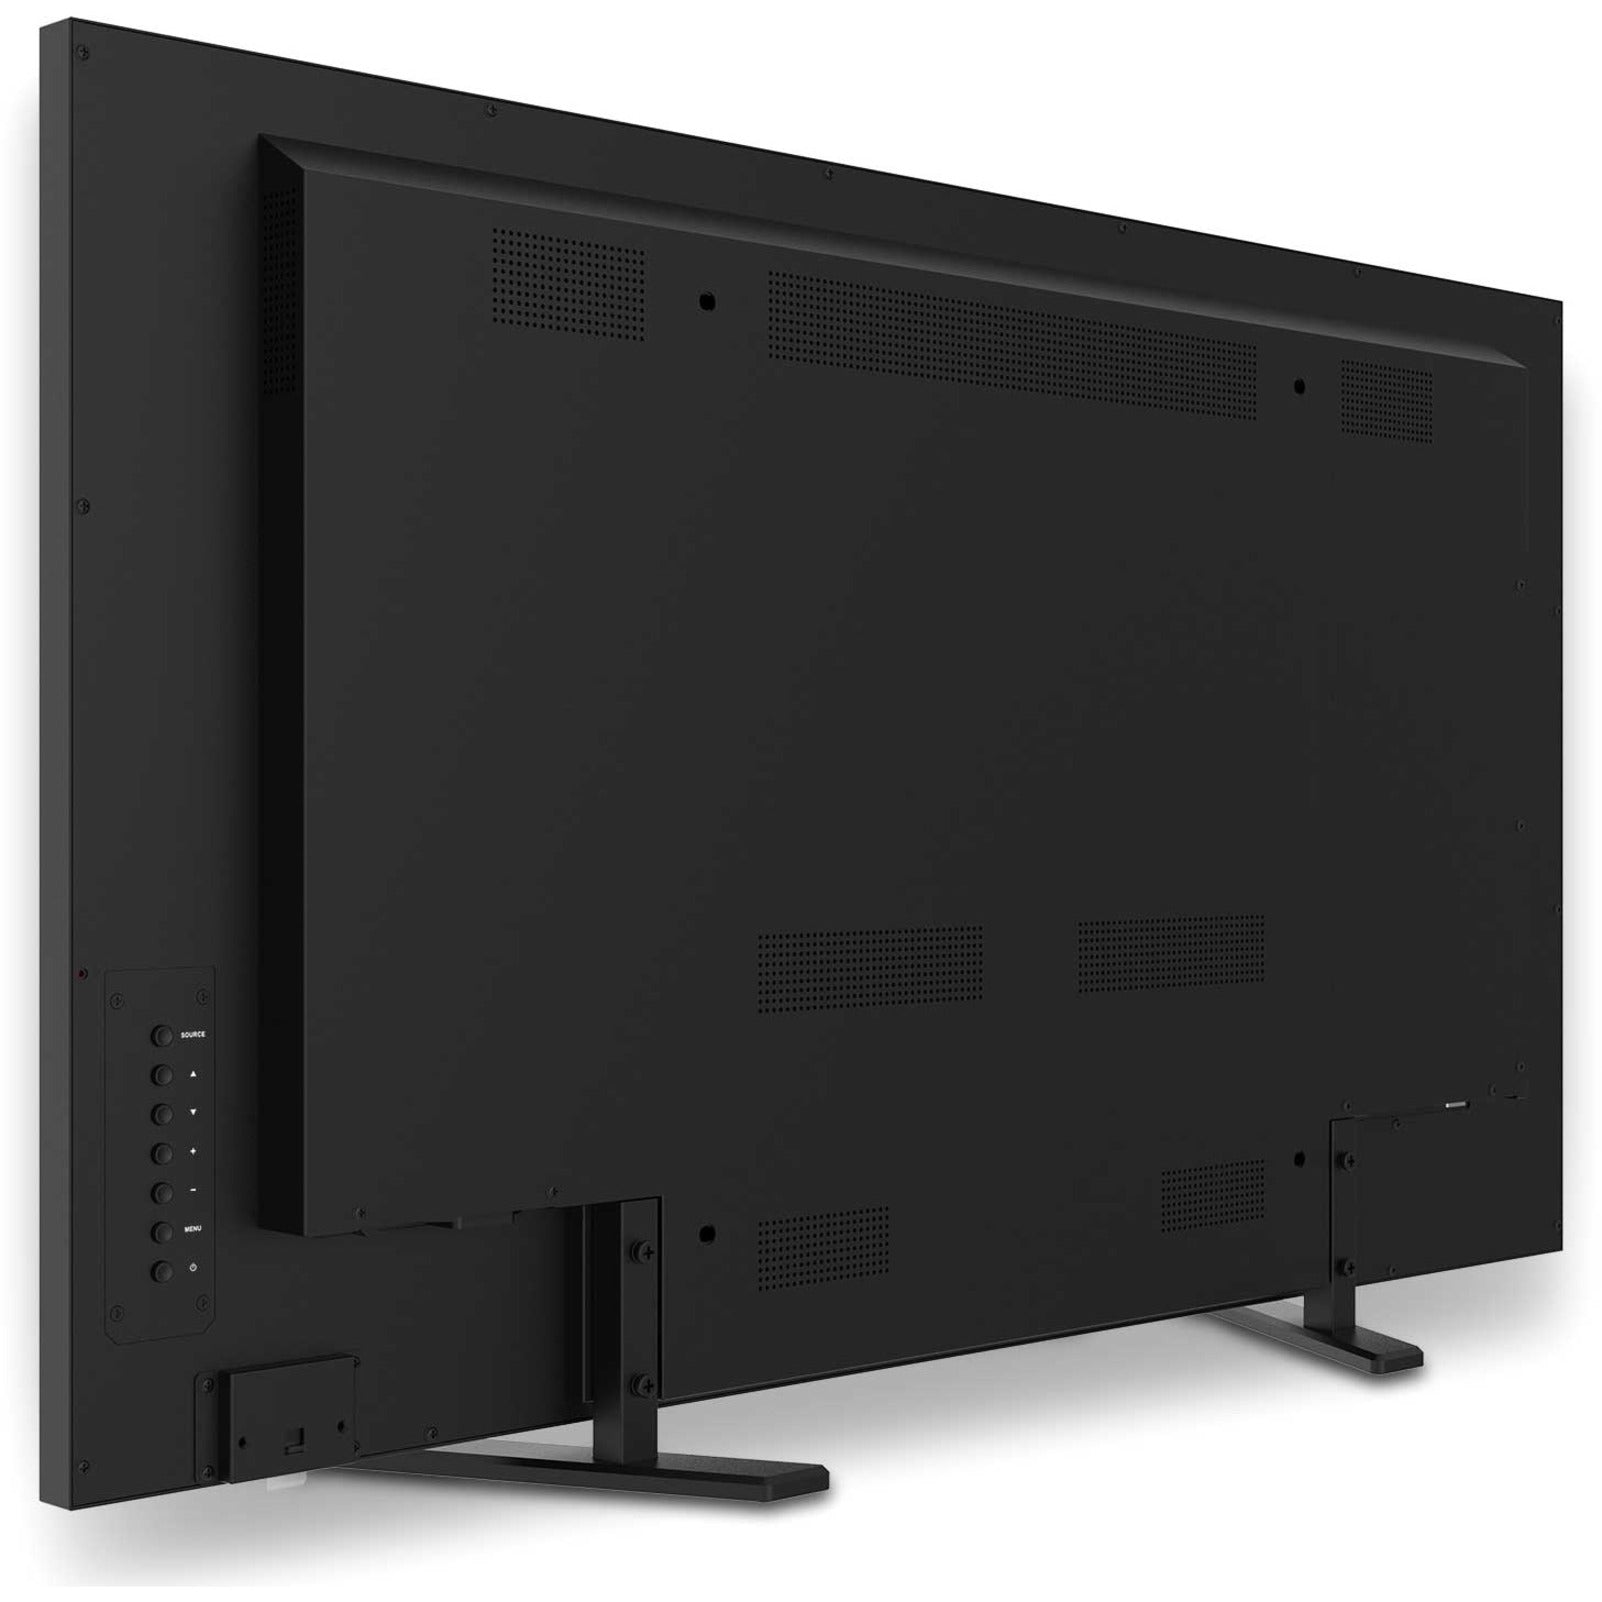 ViewSonic IFP4320 ViewBoard Collaboration Display, 42.5" 4K UHD Touchscreen, Android 8.0 Oreo, 3GB RAM, 10W Speakers